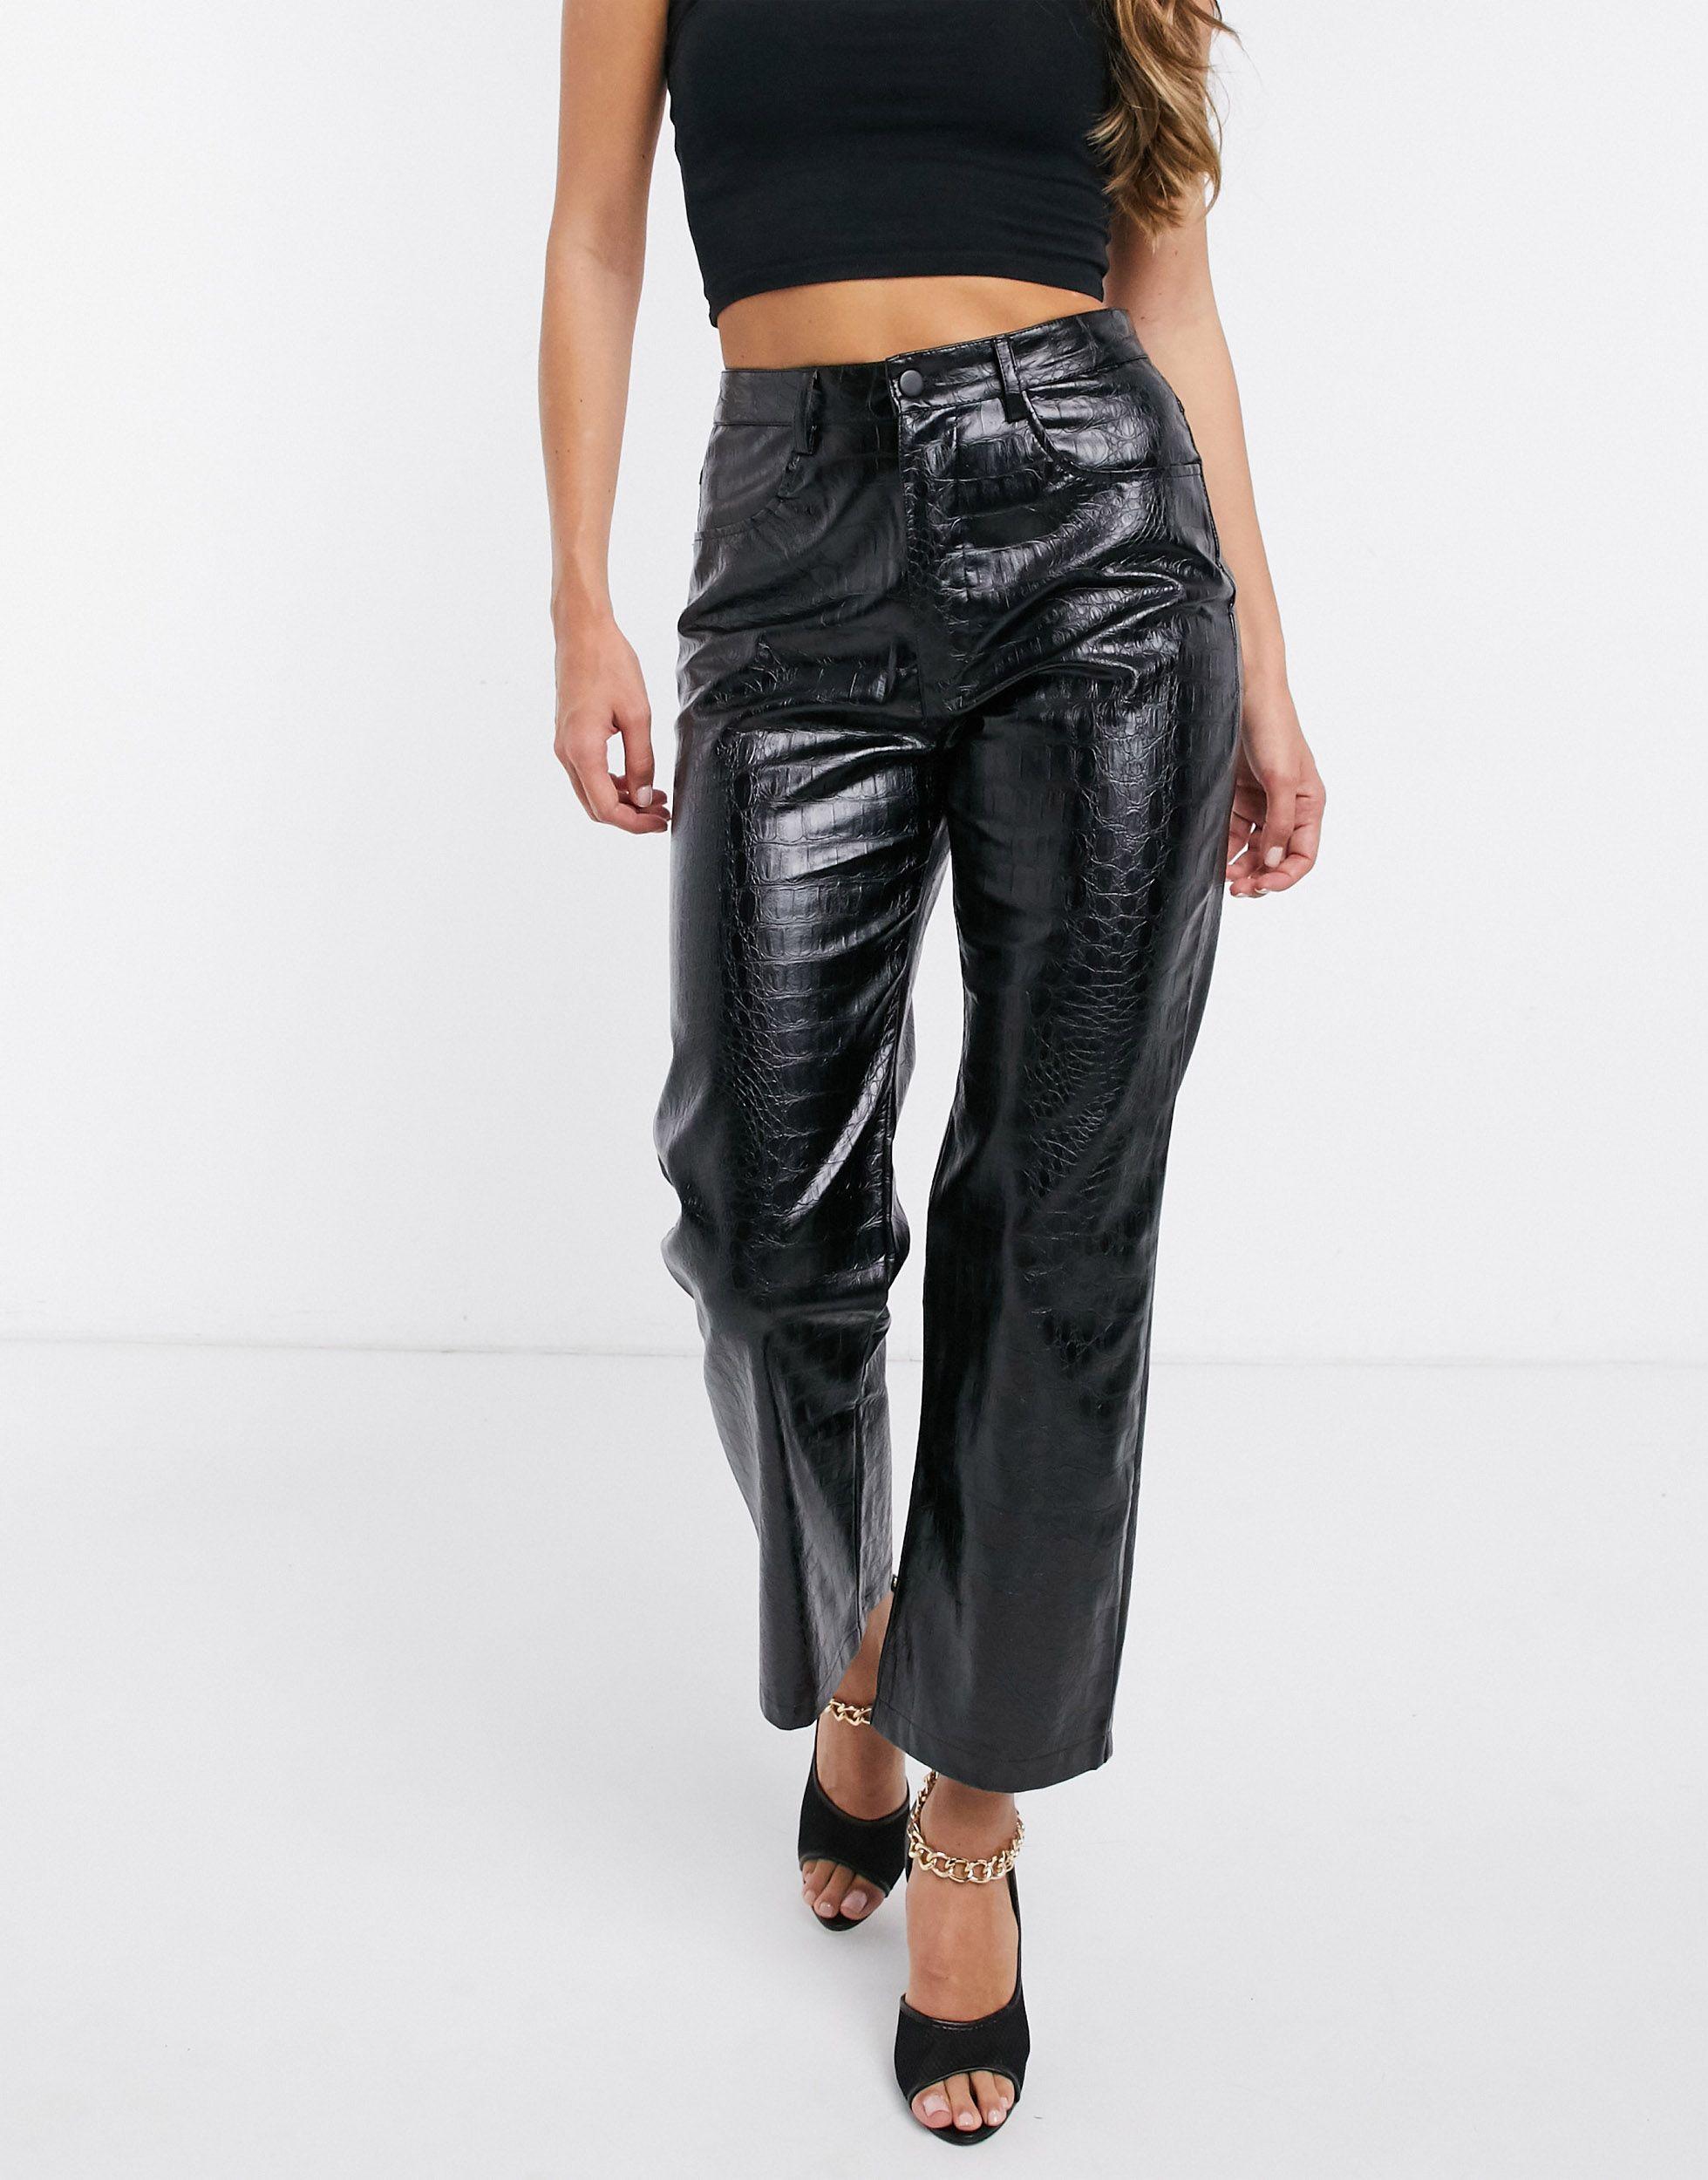 ASOS DESIGN flare jeans in black croc leather look - part of a set | ASOS